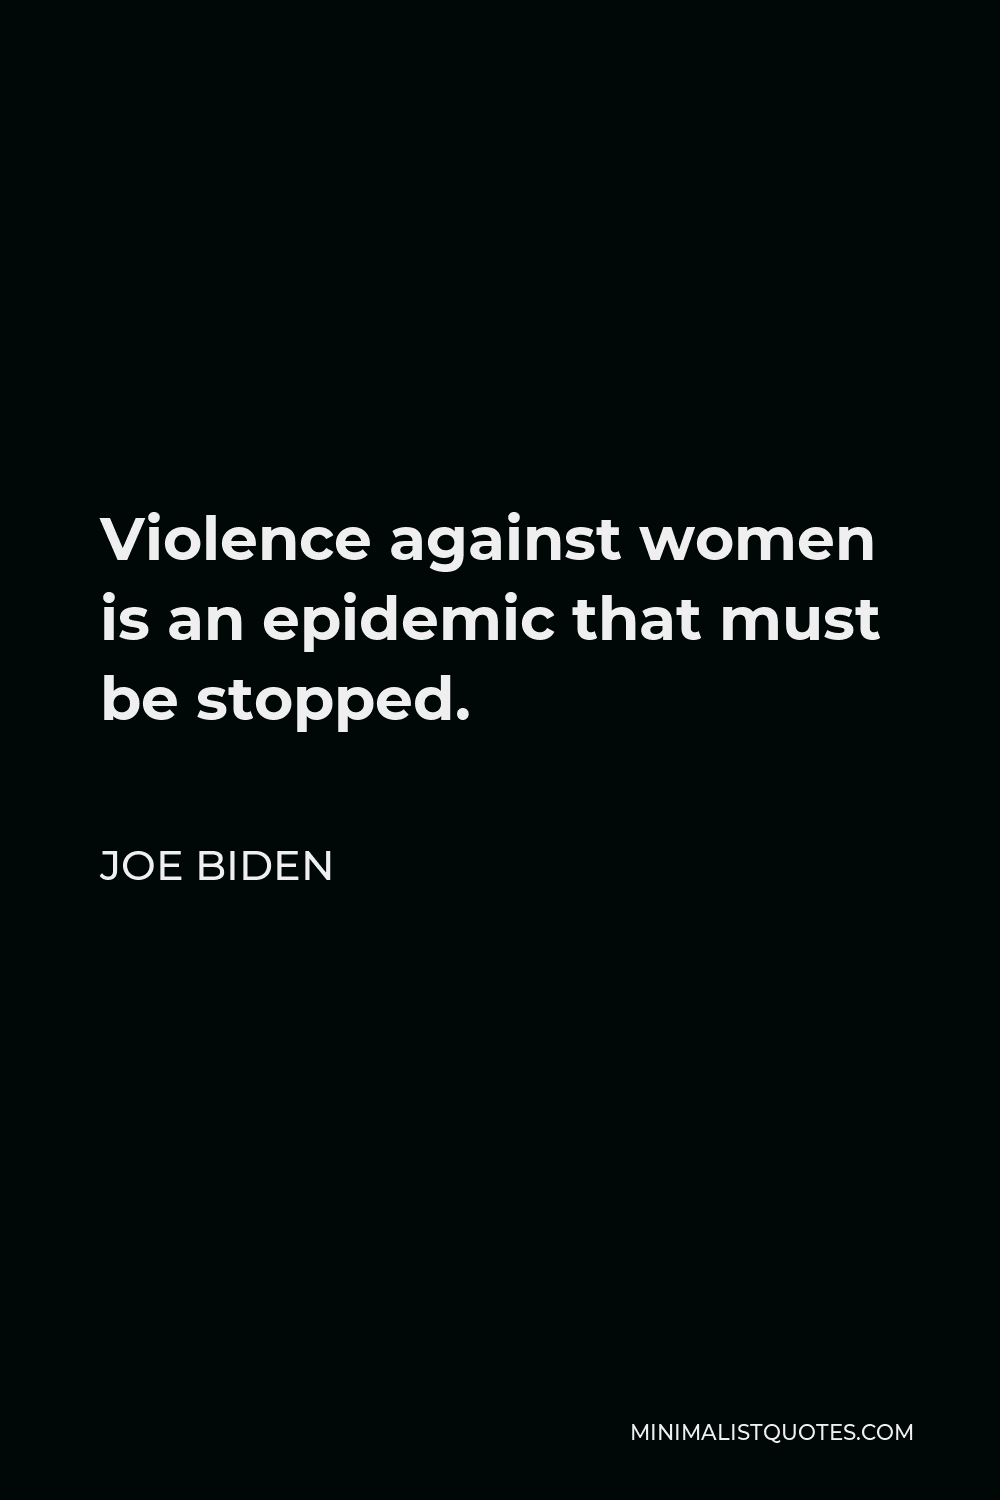 Joe Biden Quote - Violence against women is an epidemic that must be stopped.